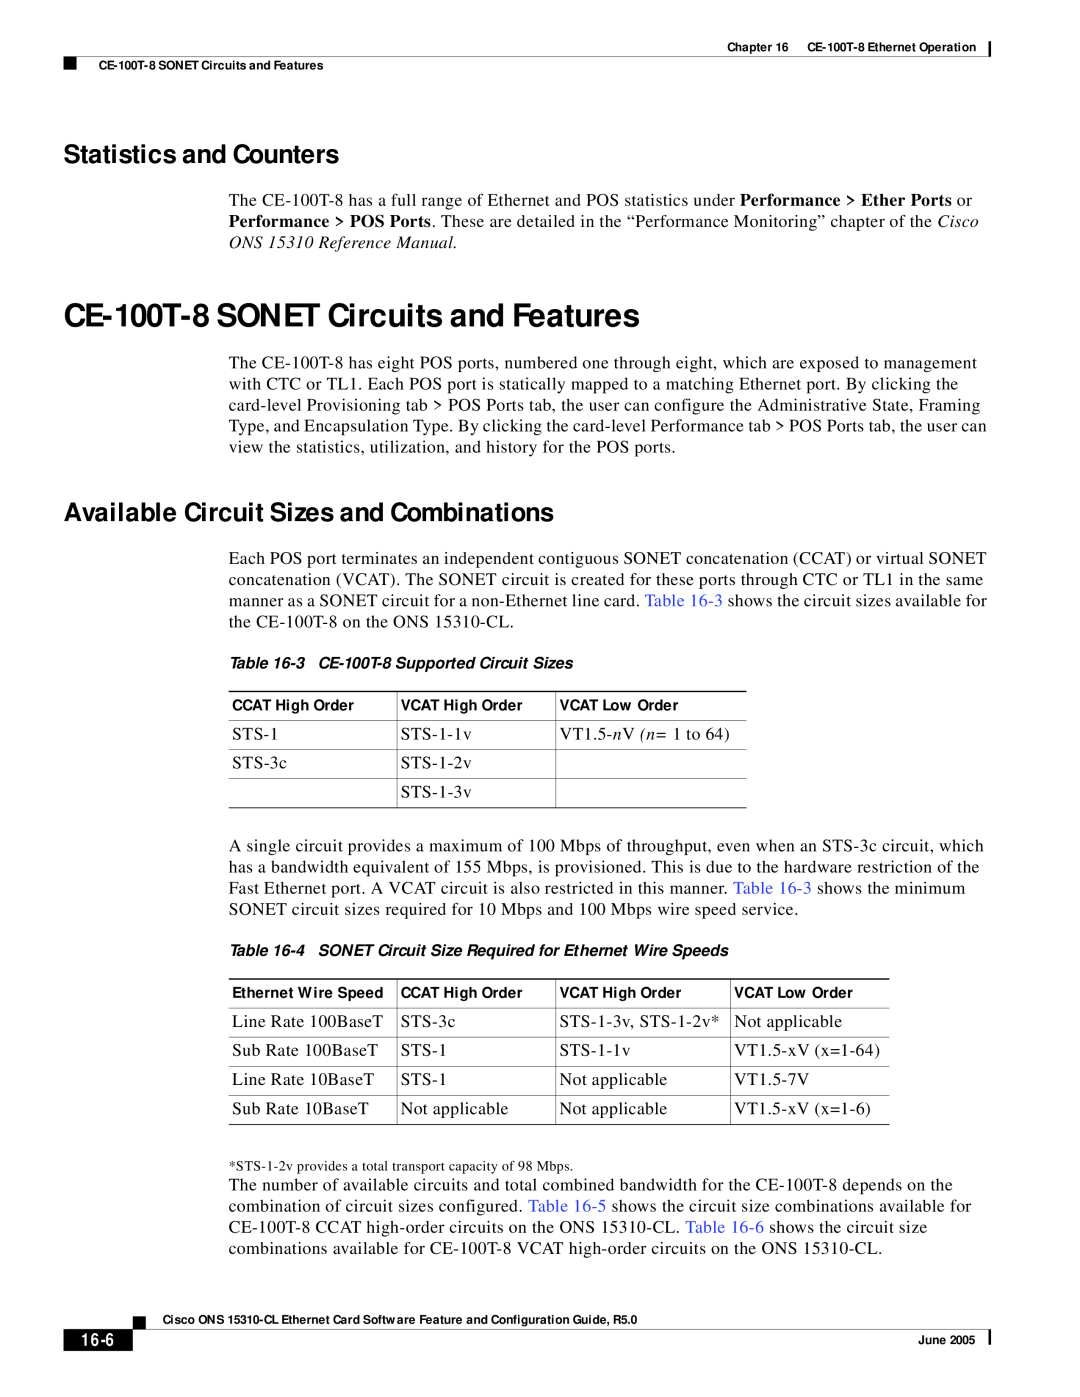 Cisco Systems CE-100T-8 SONET Circuits and Features, Statistics and Counters, Available Circuit Sizes and Combinations 